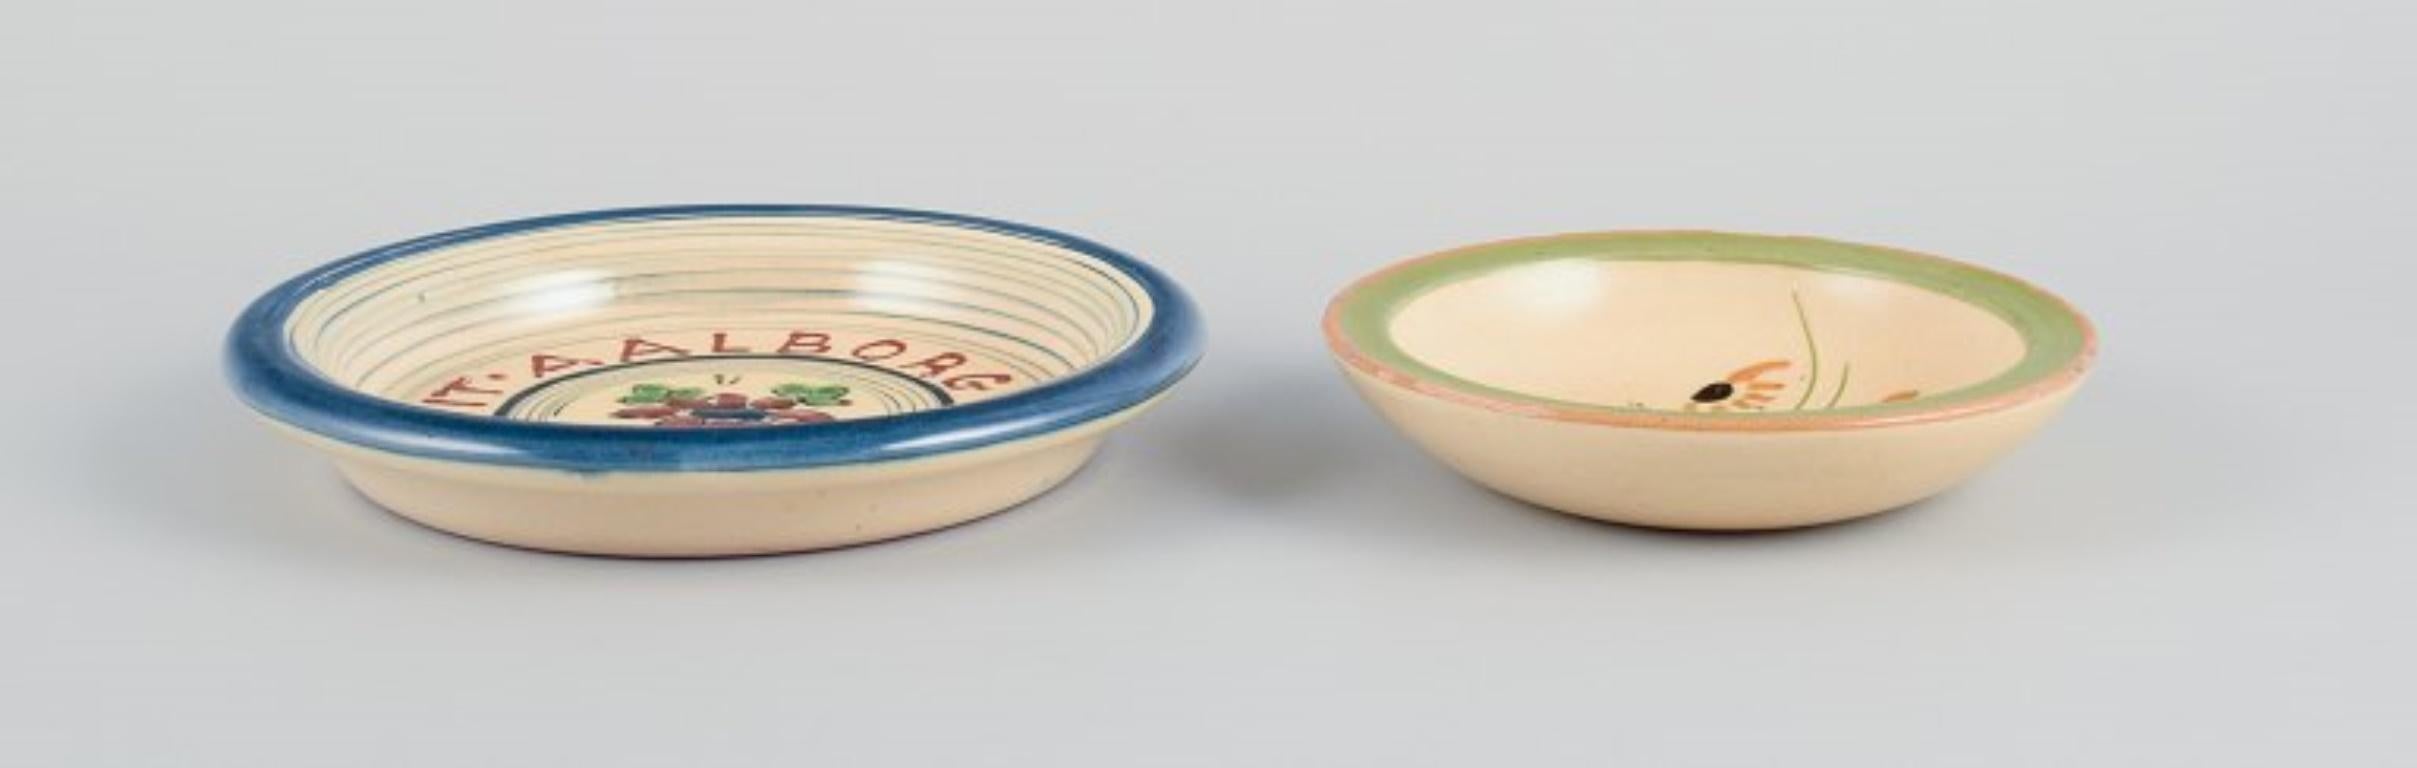 Glazed Kähler, two low bowls in ceramic 1940s.  For Sale